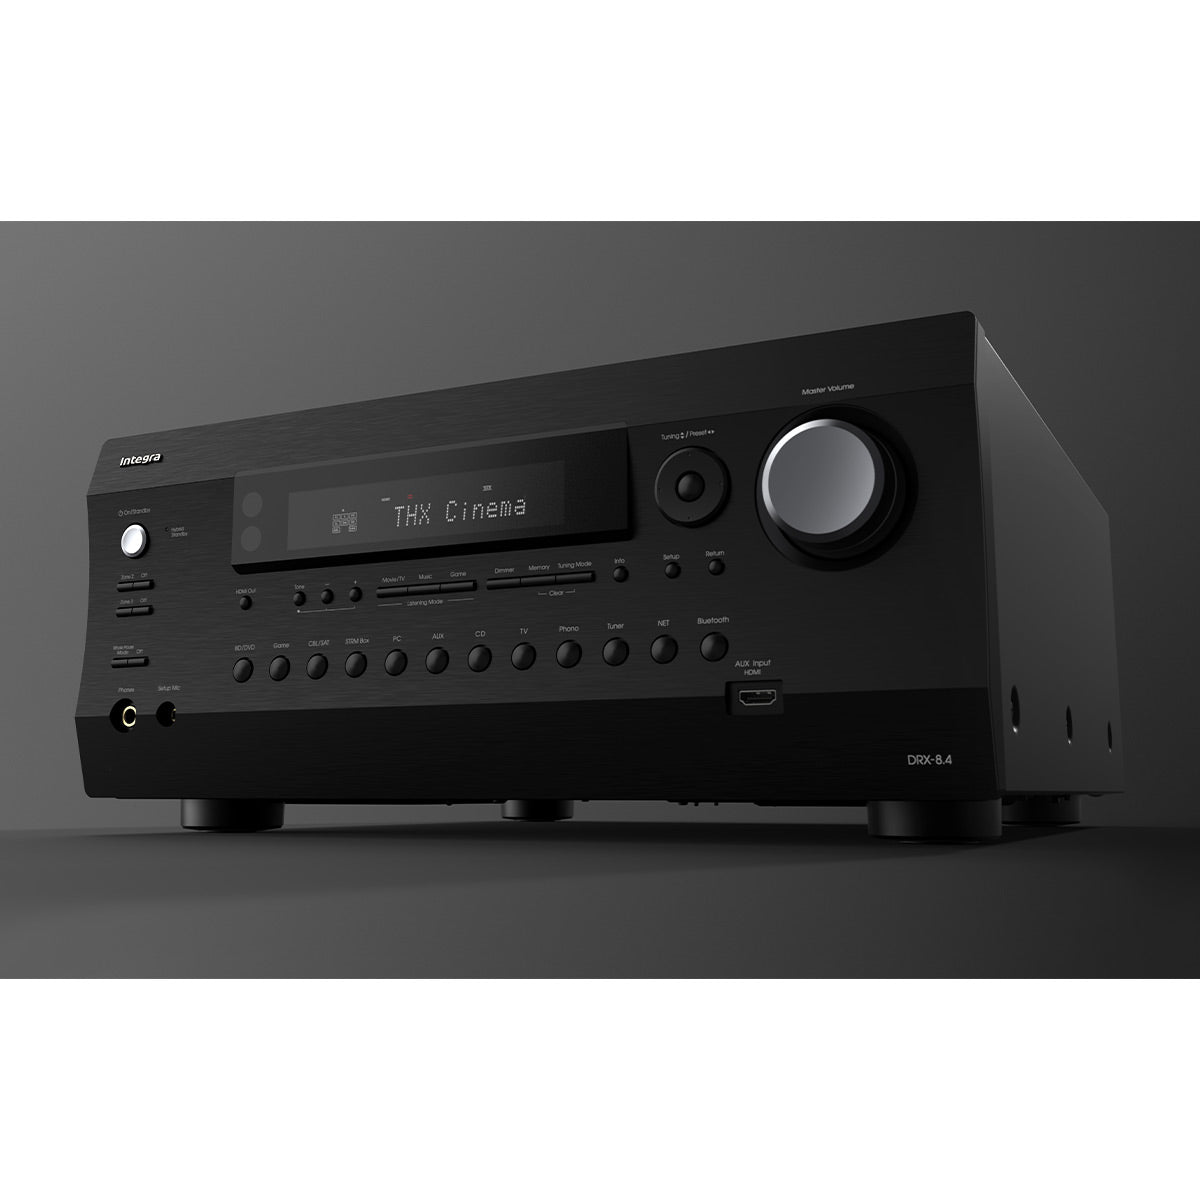 Integra DRX-8.4 11.4 Channel Network Home Theater A/V Receiver with Dolby Atmos, Dirac Live Room Correction, Roon Ready, Works with Sonos, & Built-In ESS Sabre DAC